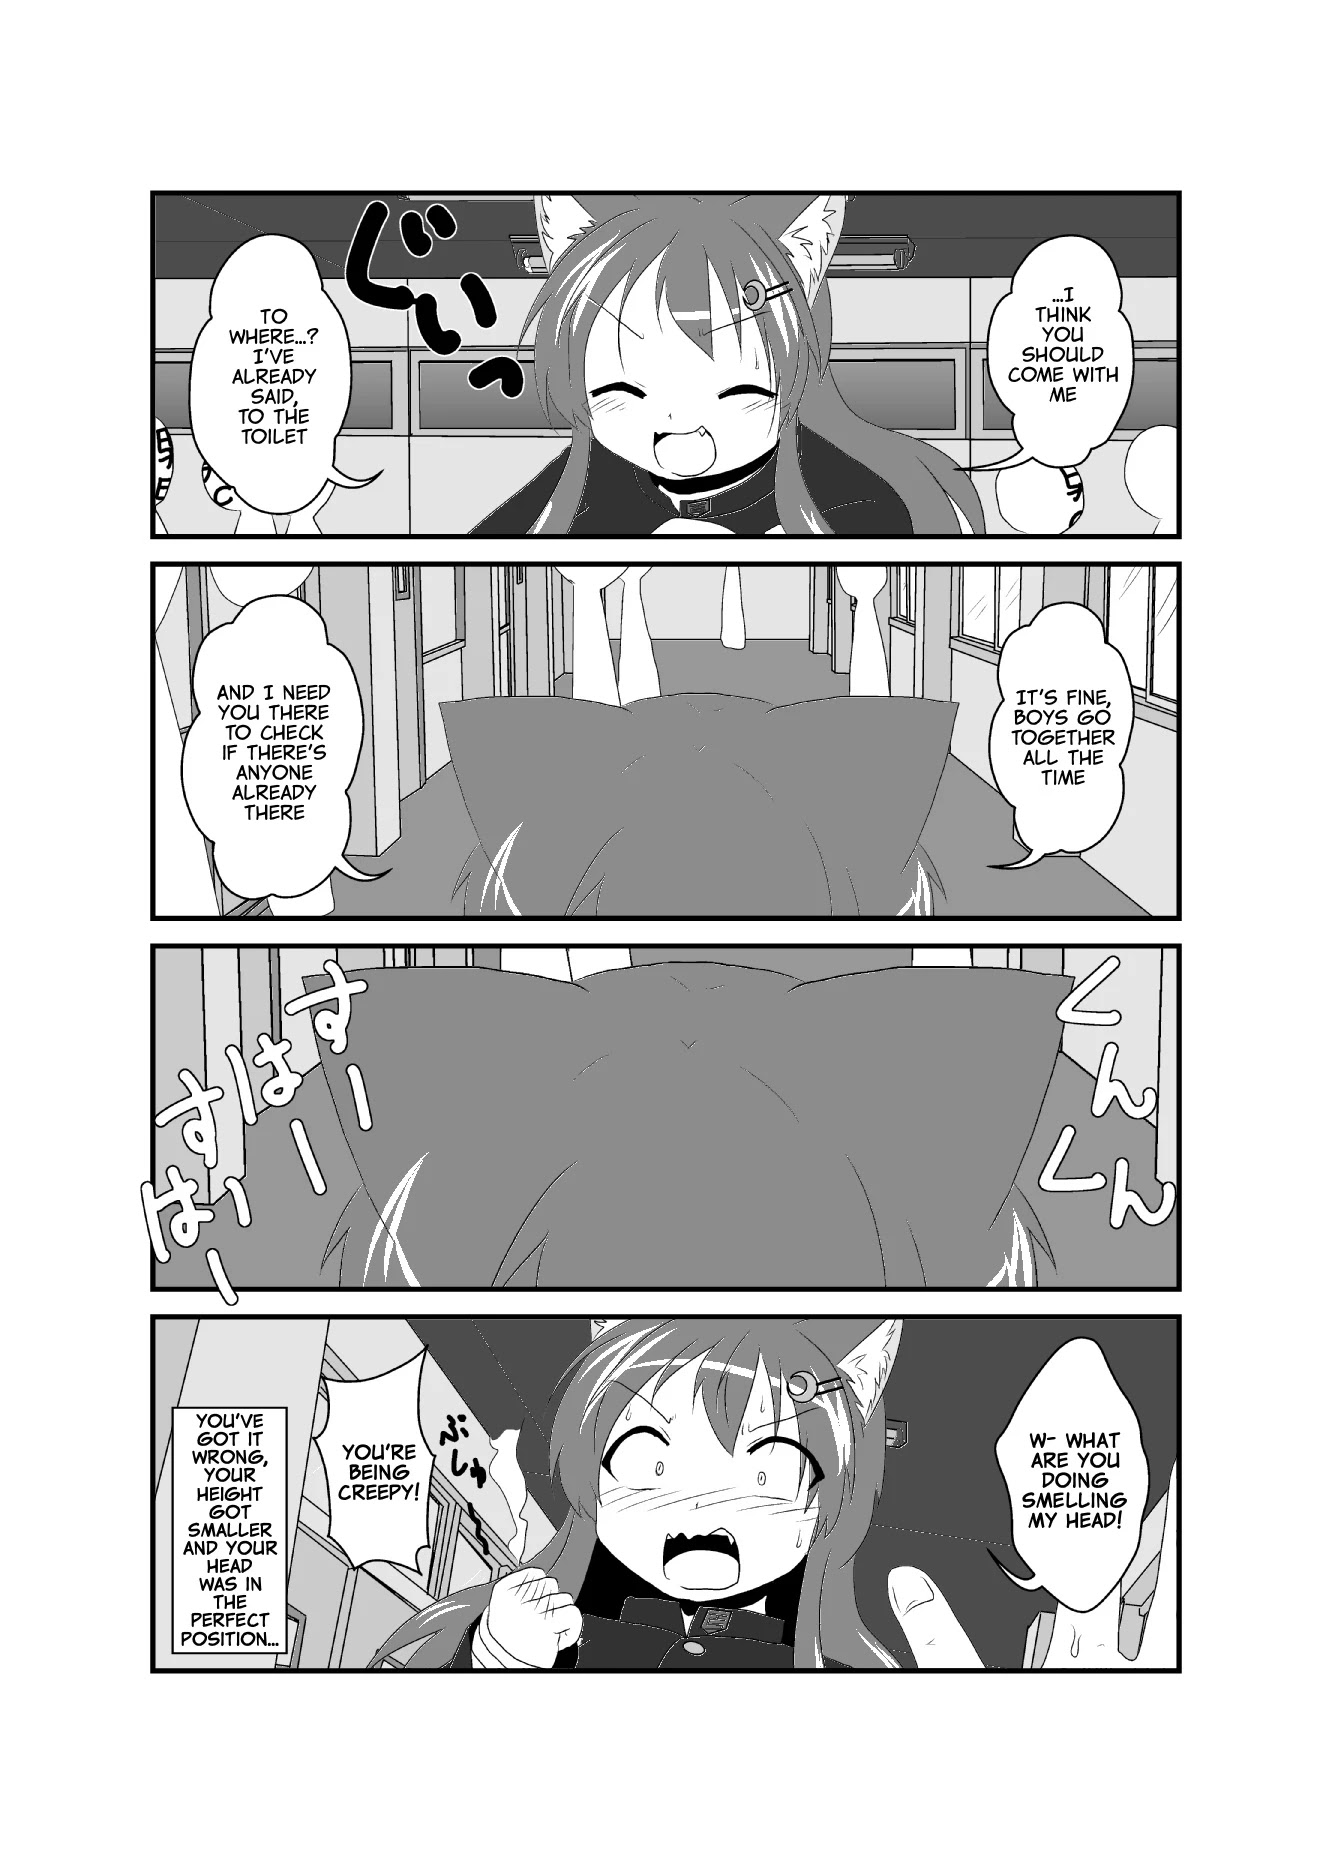 Starting New Life As A Girl - Page 1